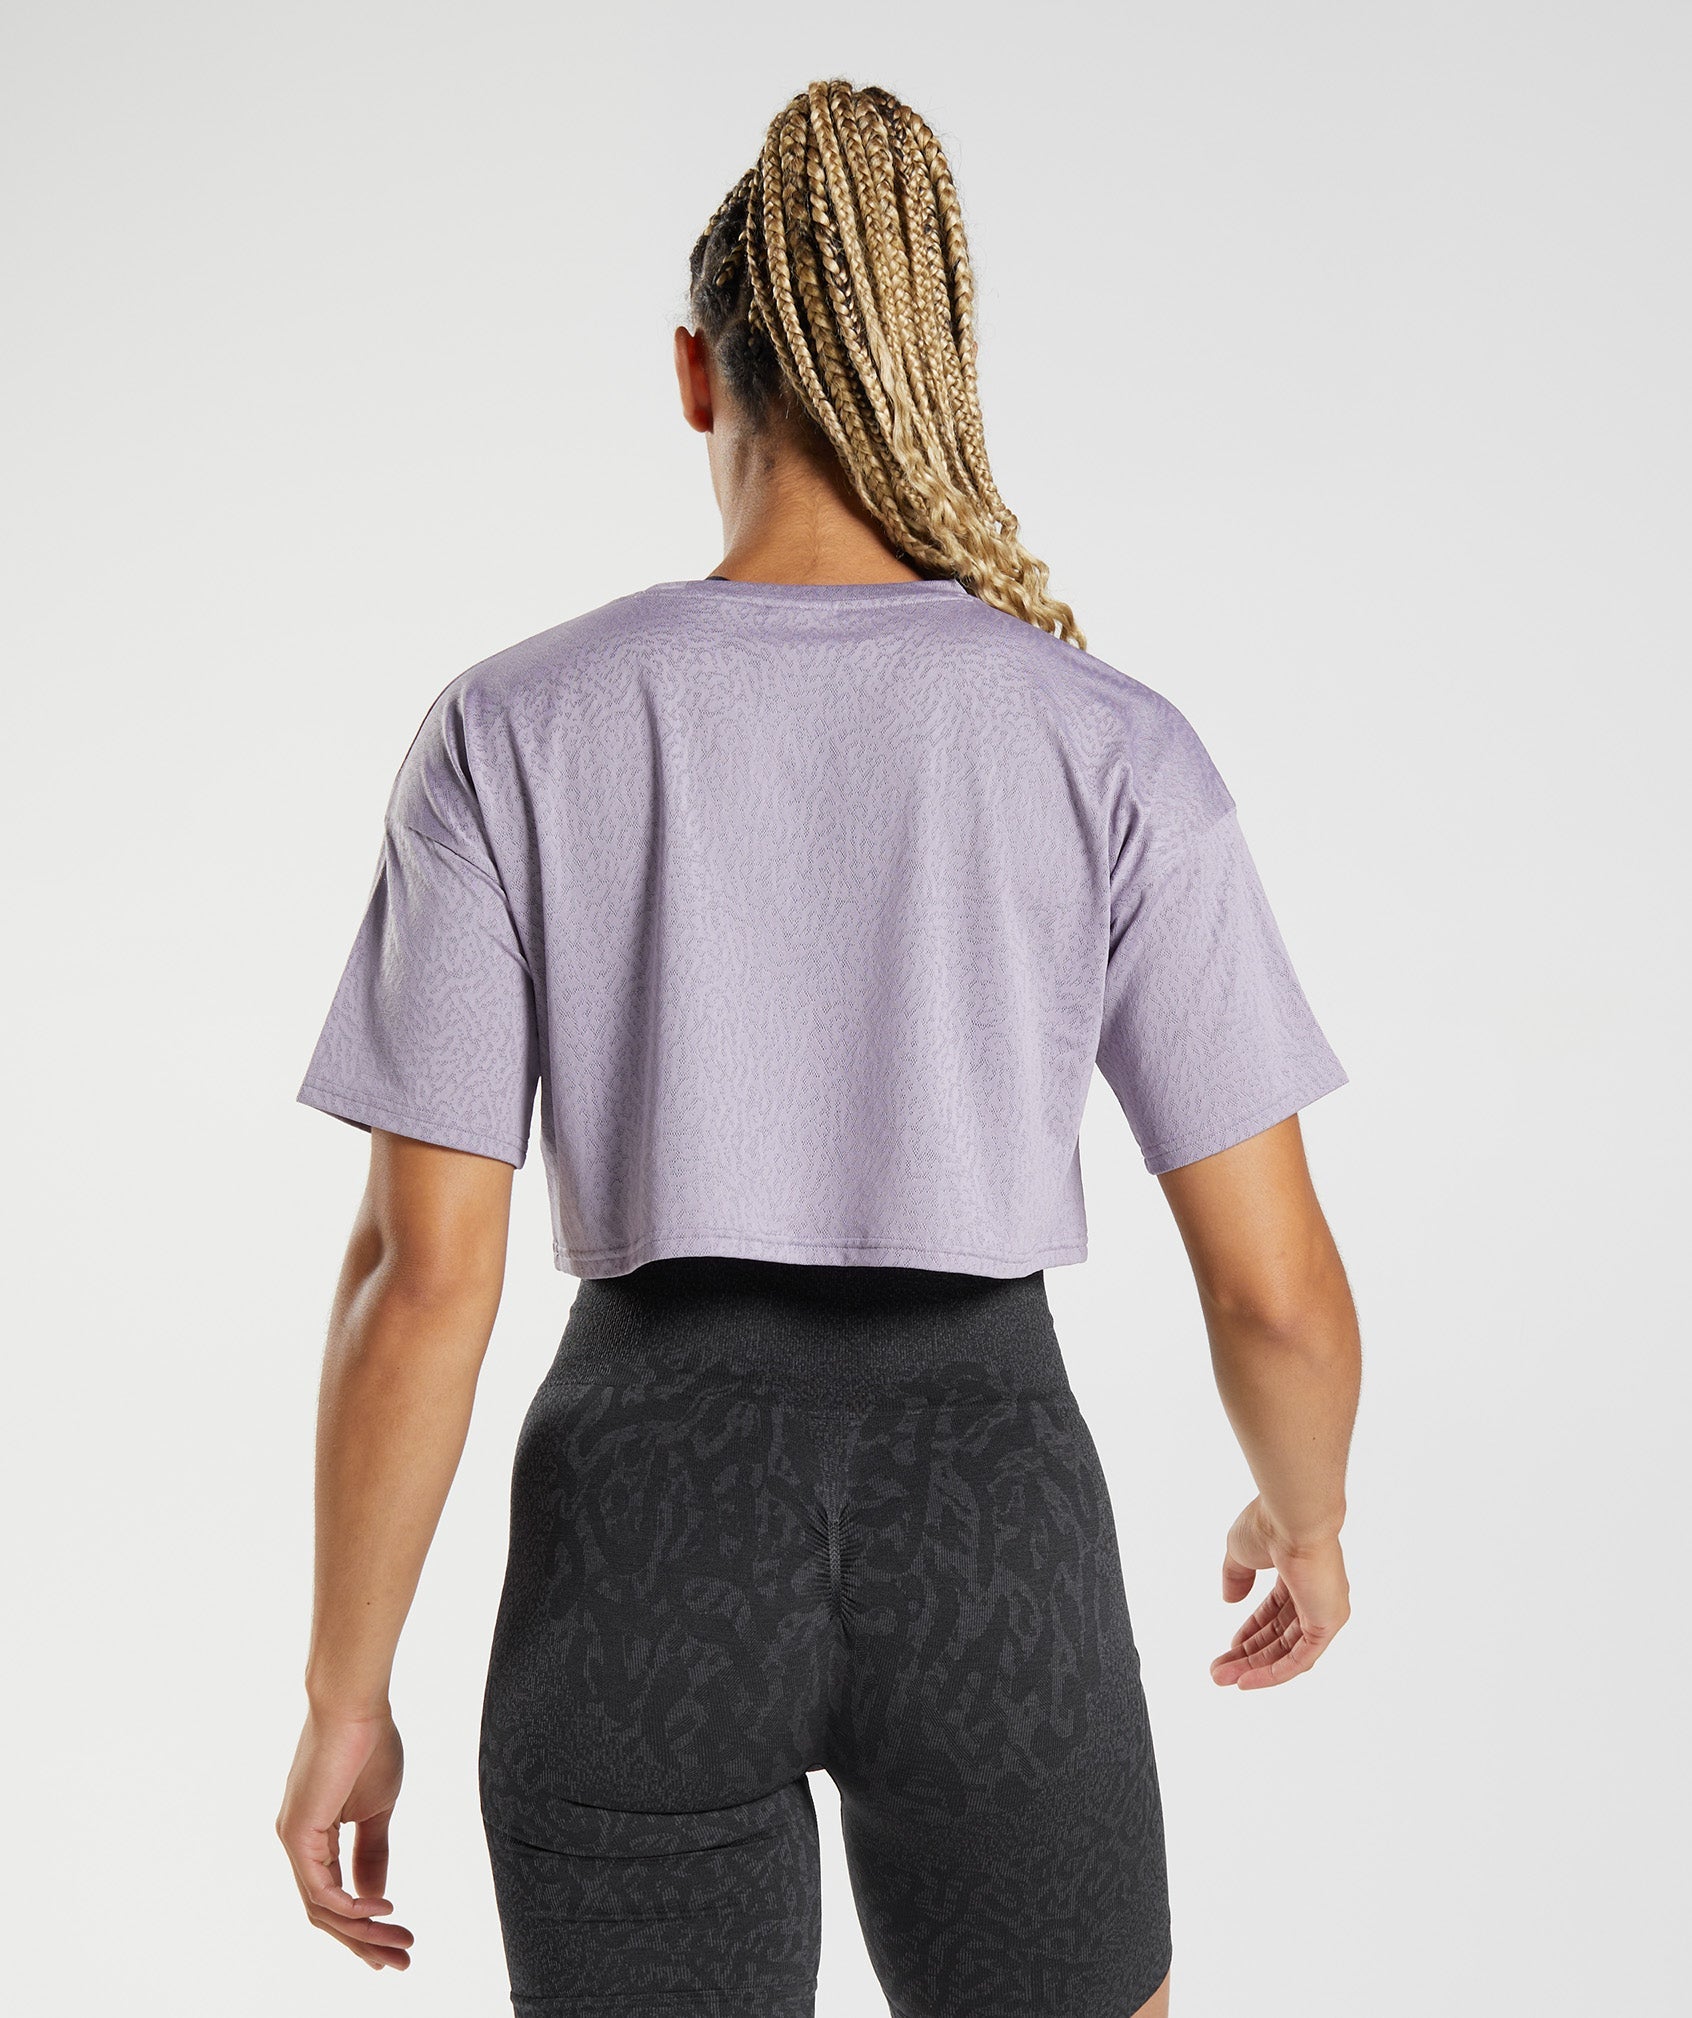 Adapt Animal Seamless Crop Top in Reef | Shaded Lilac